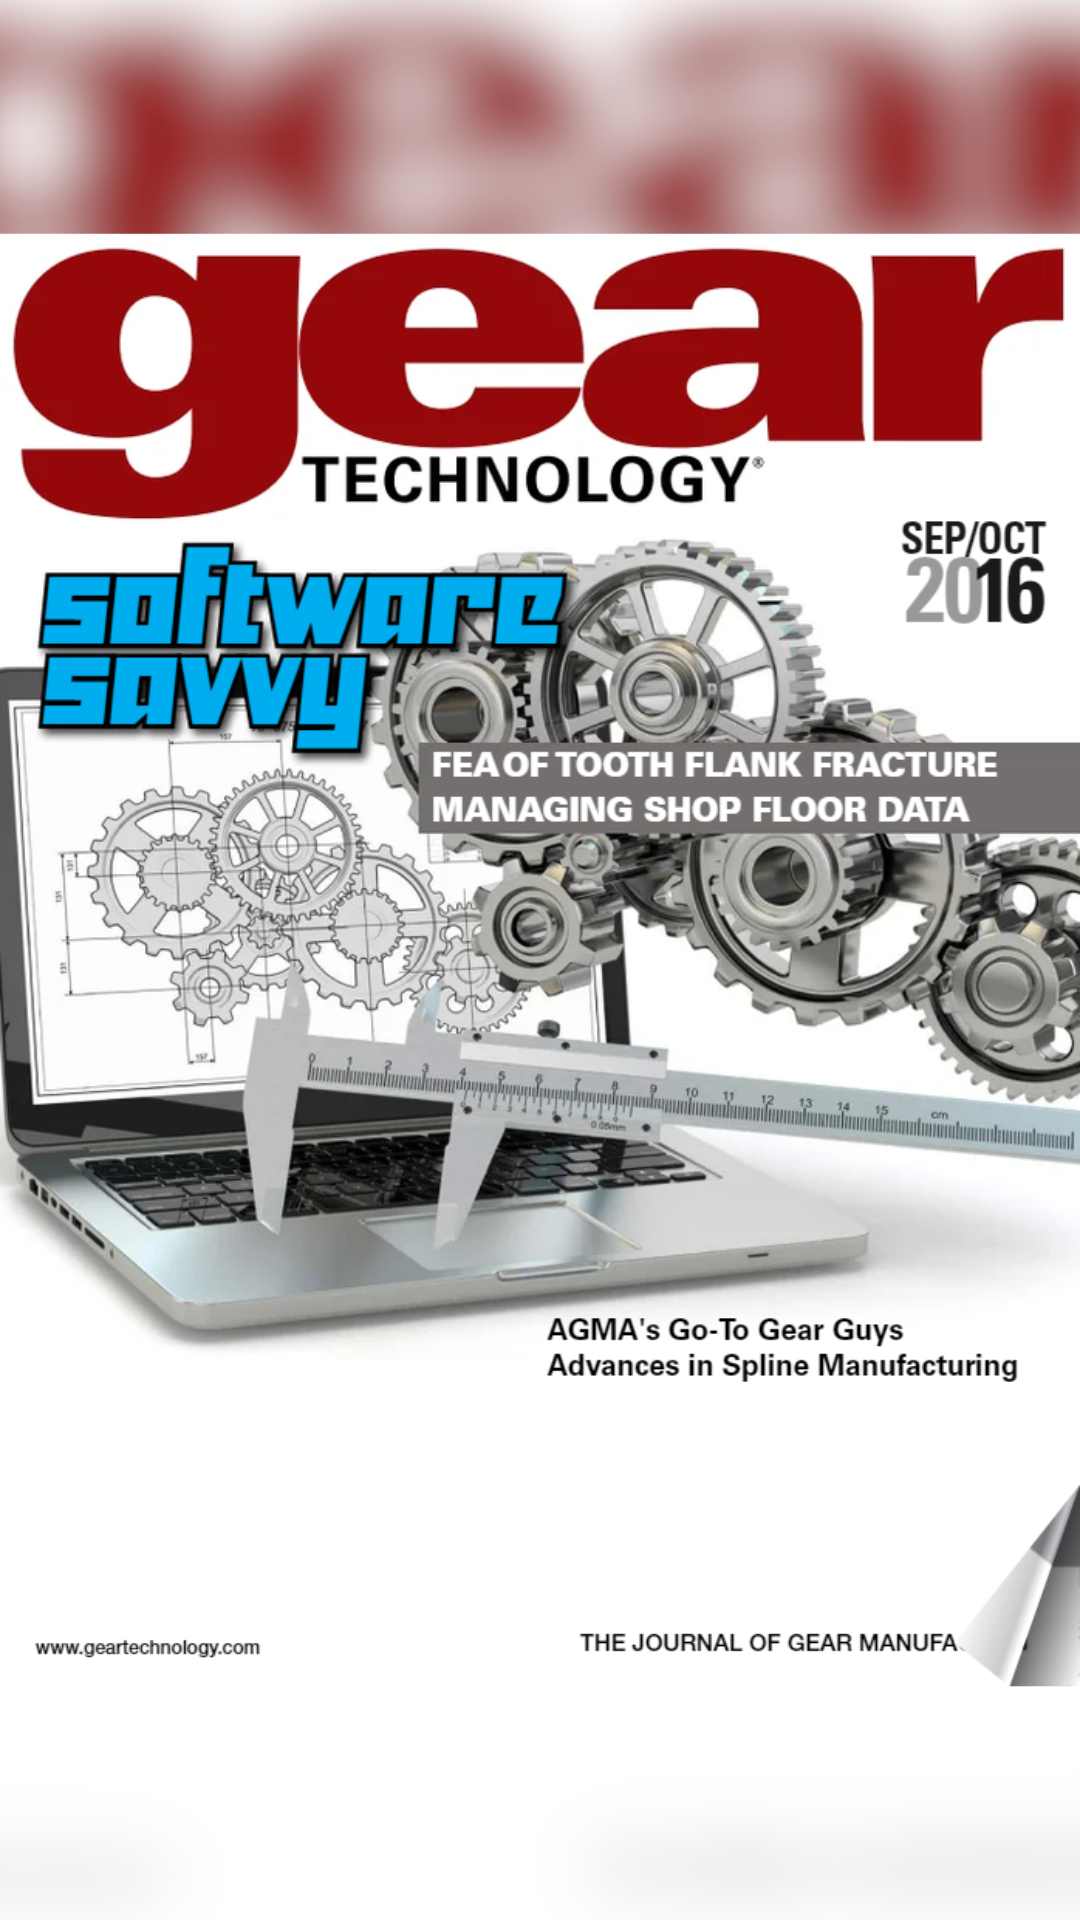 Gear Technology Magazine Sep/Oct 2016 front cover 'Software Savvy'.